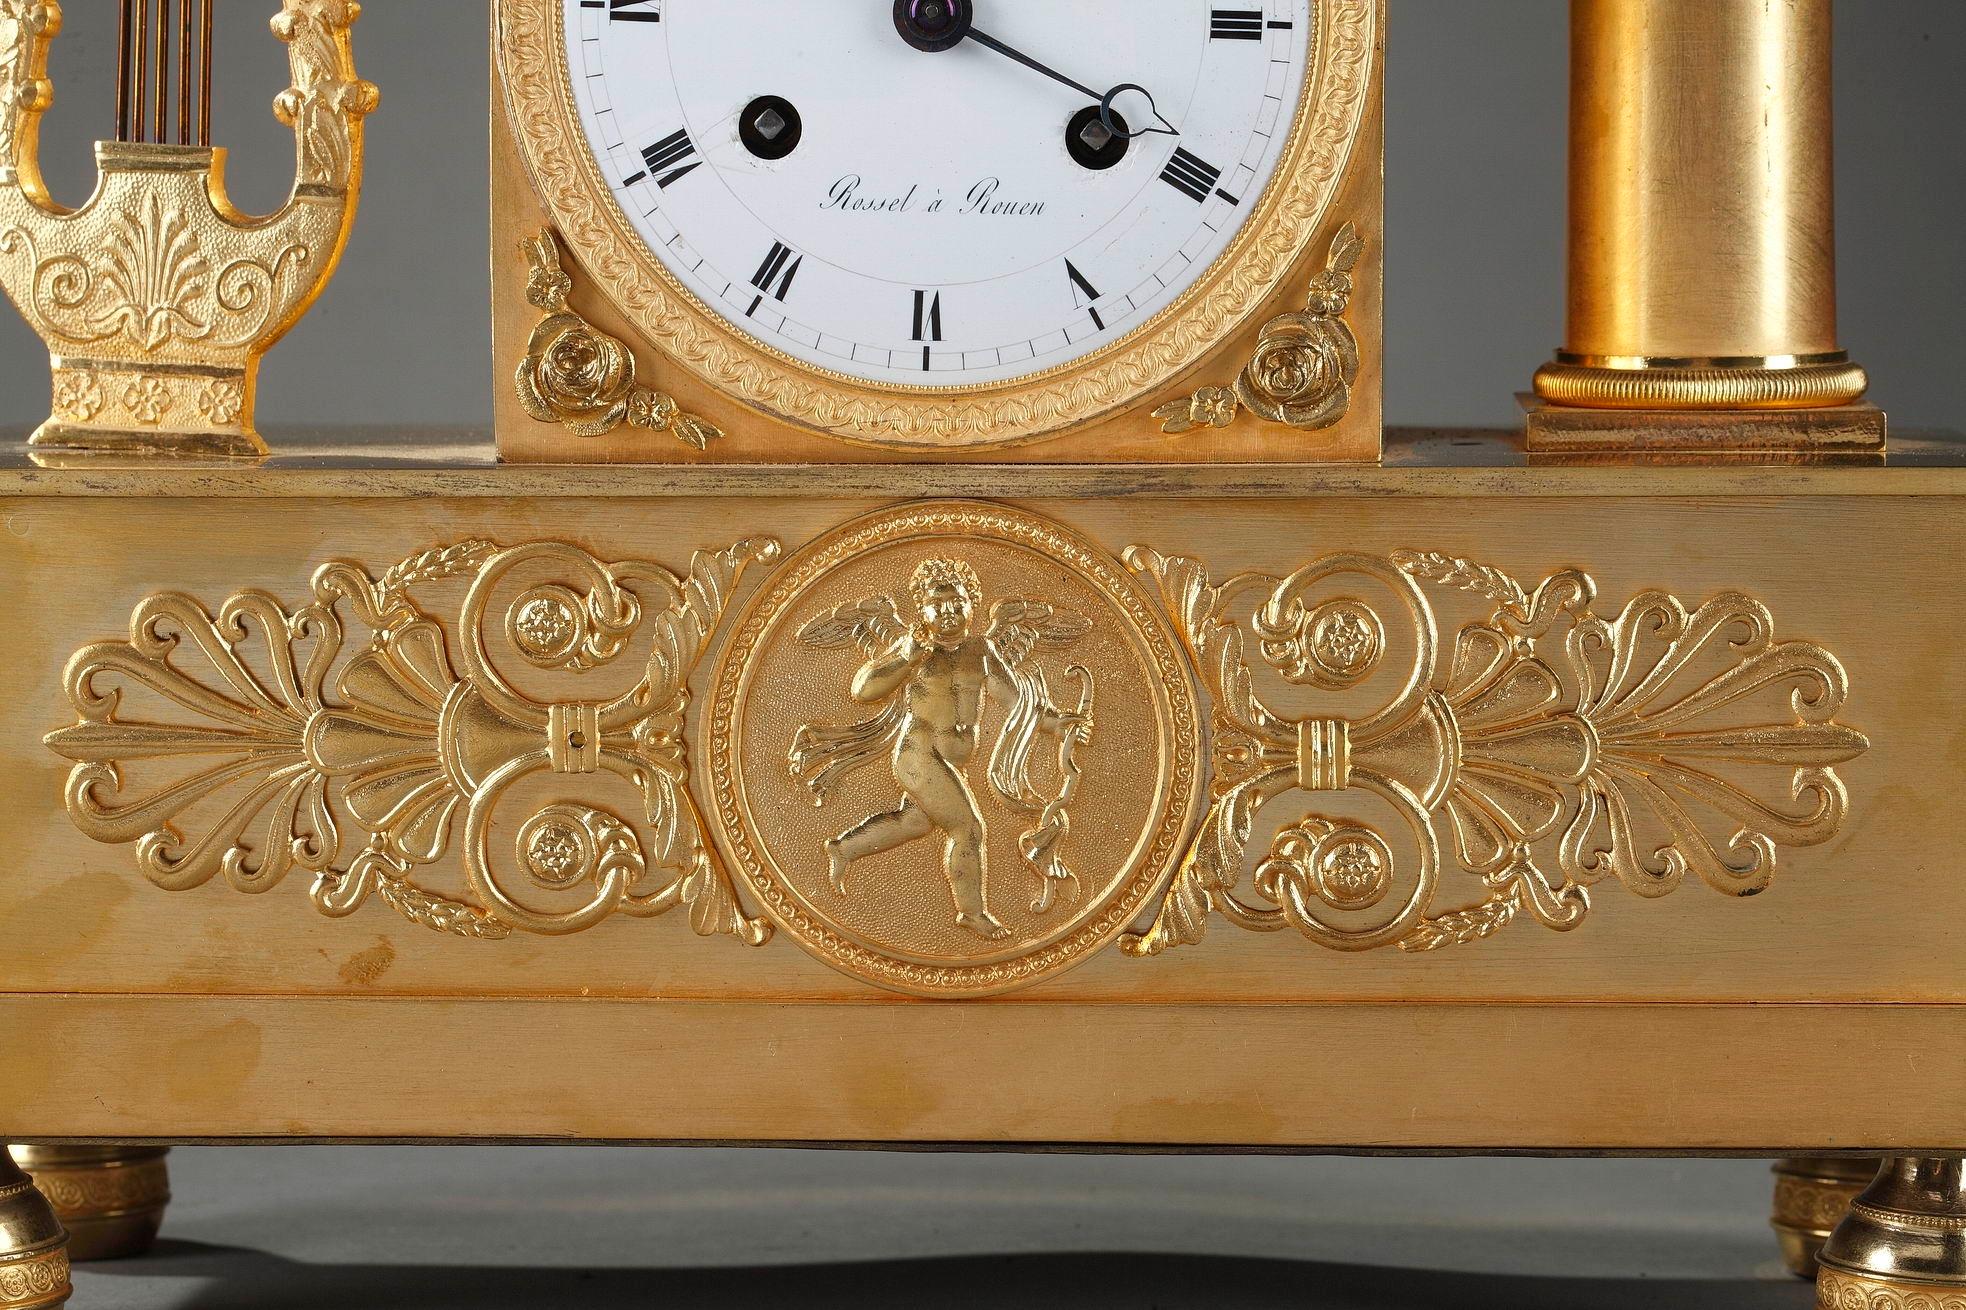 French Empire pendulum clock finely crafted of gilt bronze, featuring a young spinner wearing a classical dress, seating on the dial near a lyre and an ewer. The base is accented by generous scrolls, palmette and a central medallion with Cupid. The